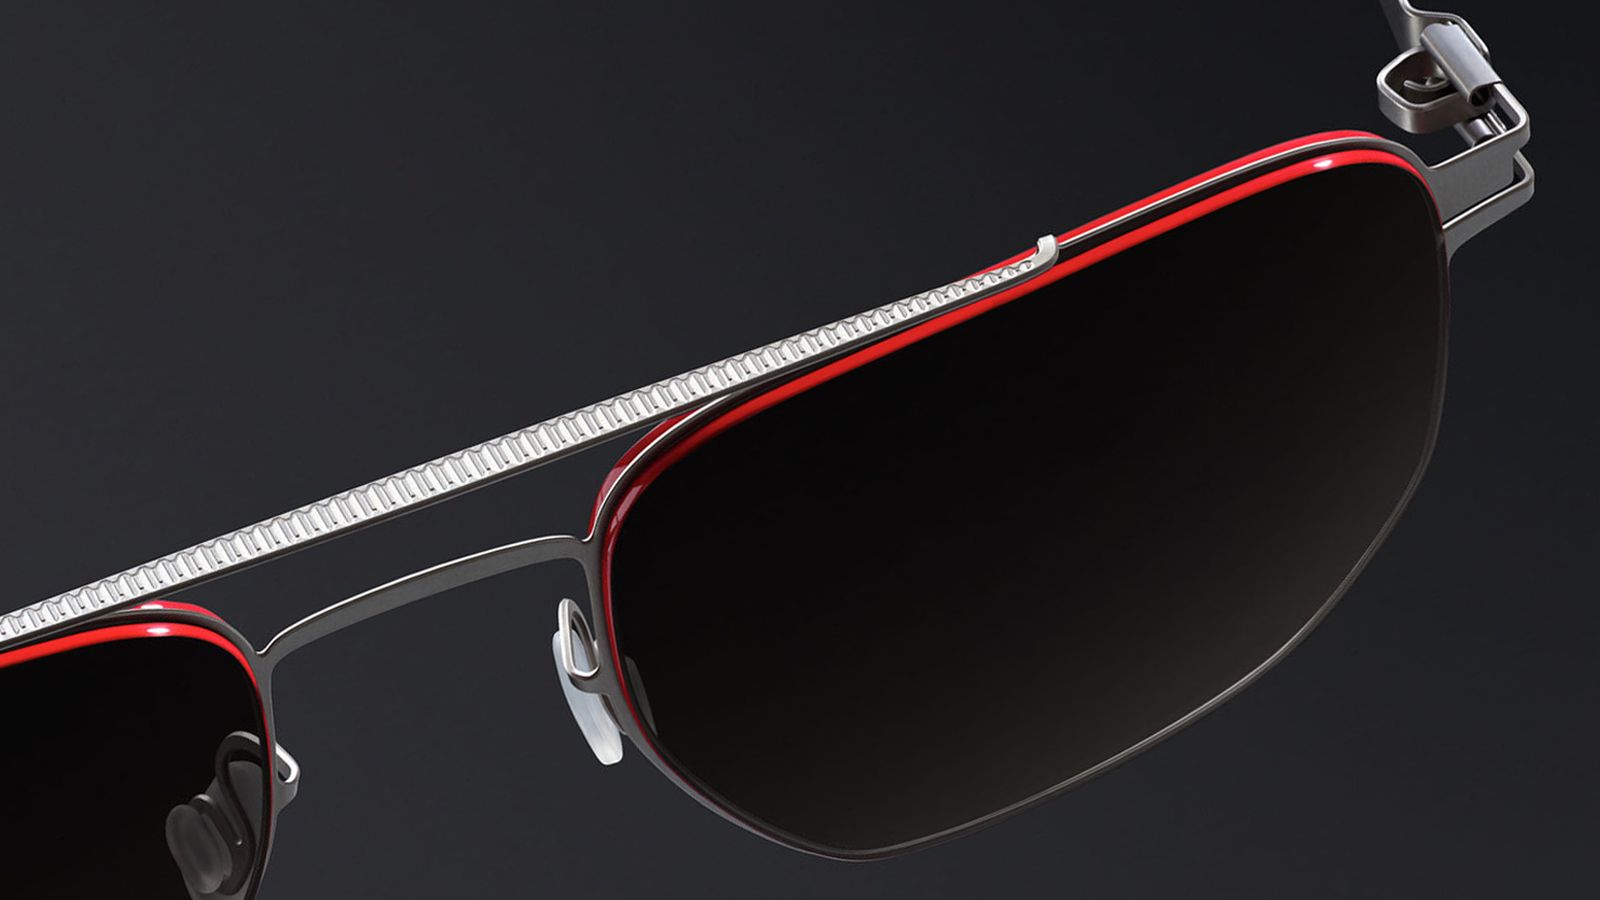 Leica has made some sunglasses with tech from its cameras and lenses ...